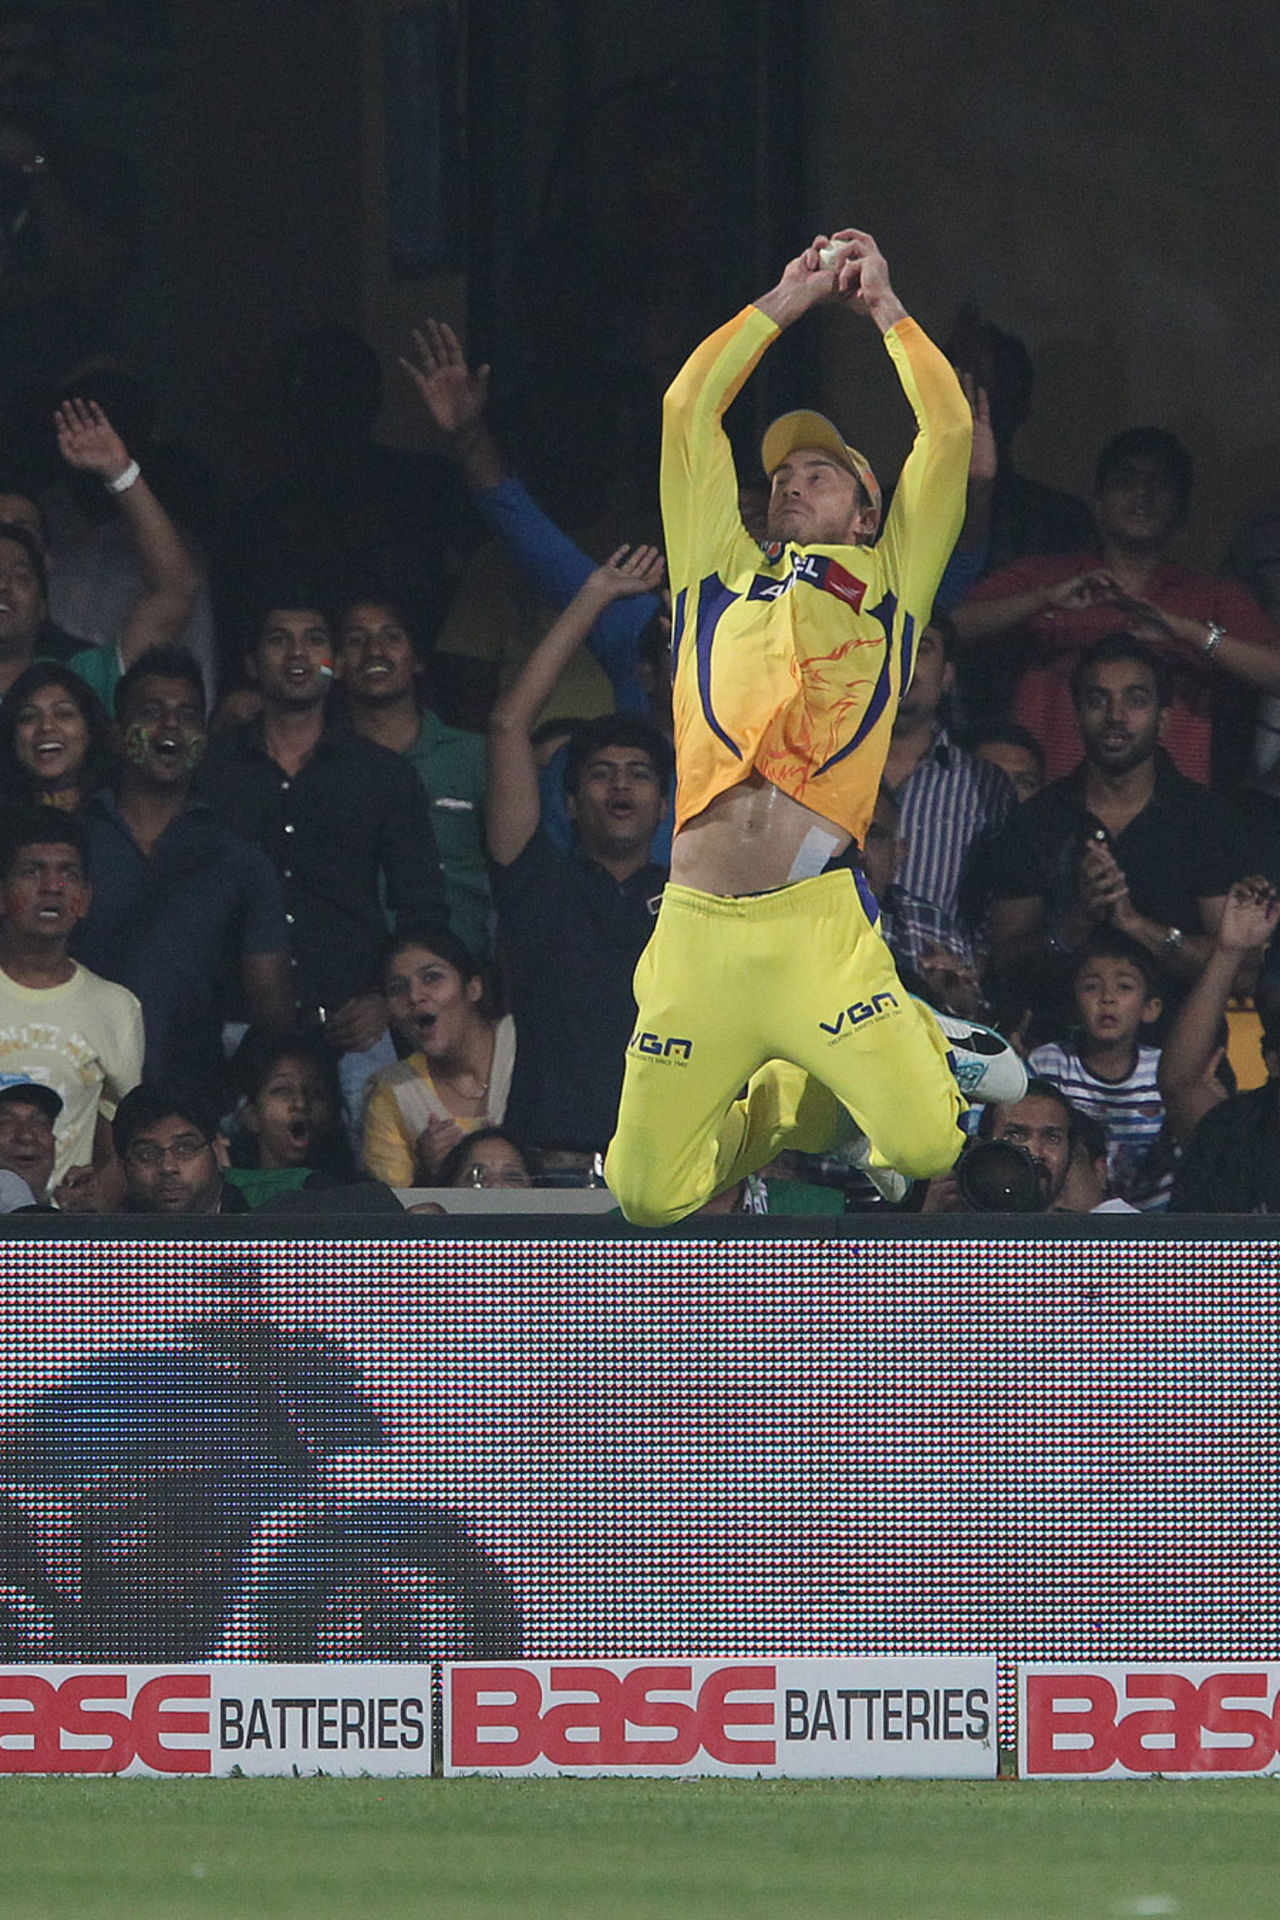 Faf du Plessis was unfortunate not to complete a stunning catch at the boundary, Chennai Super Kings v Kolkata Knight Riders, Final, CLT20, Bangalore, October 4, 2014